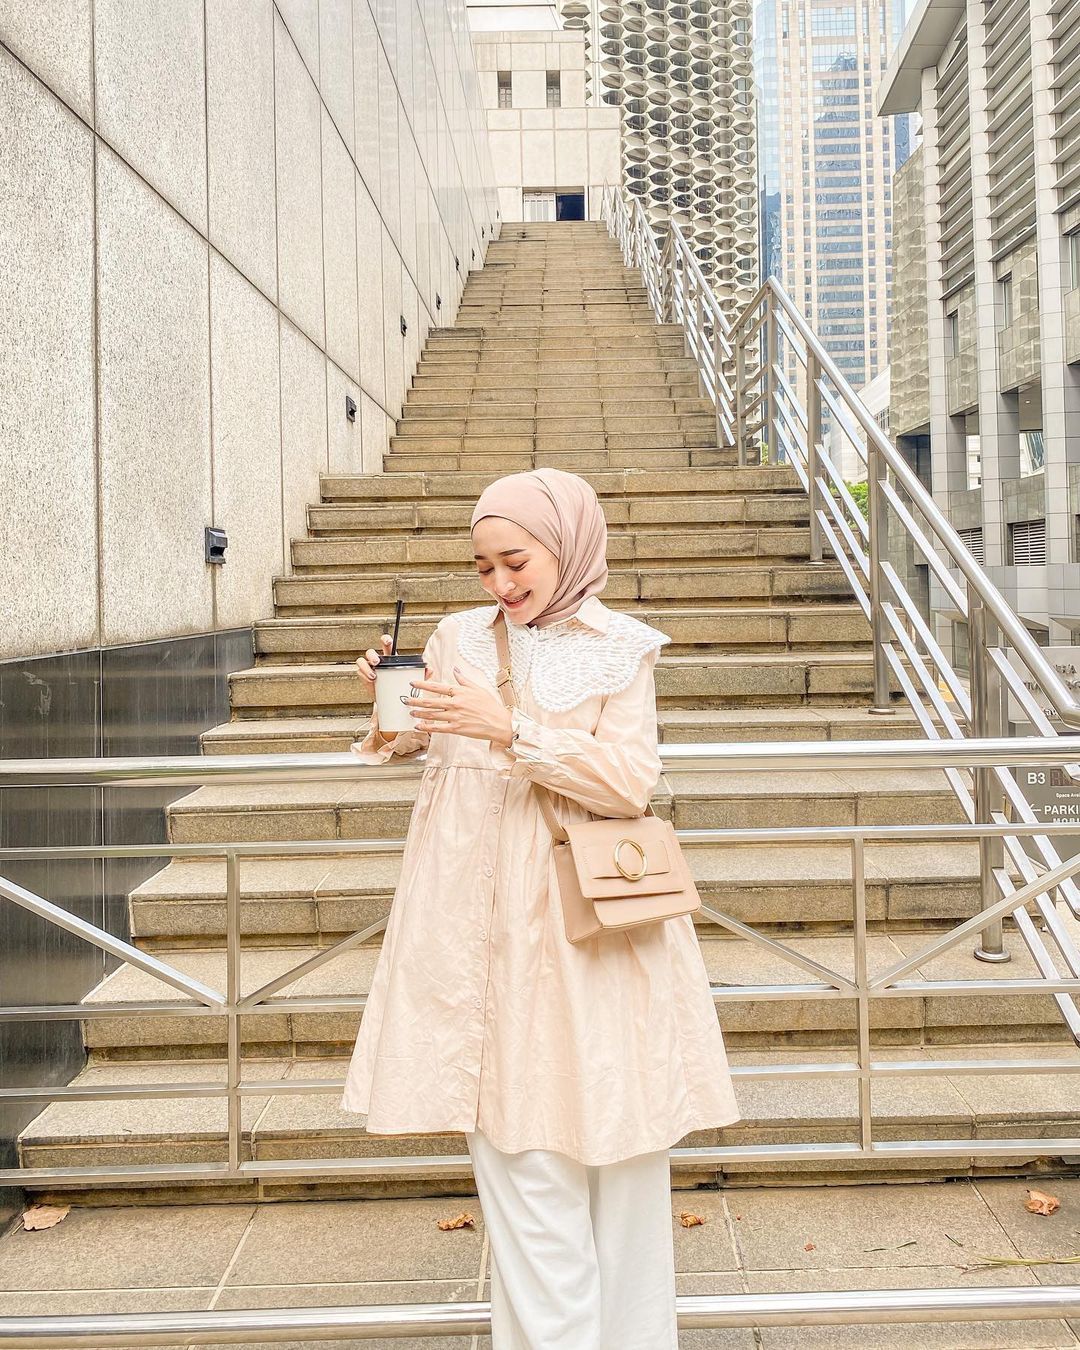 Summer Hijab Outfit Ideas That You Can Follow For The Next Looks